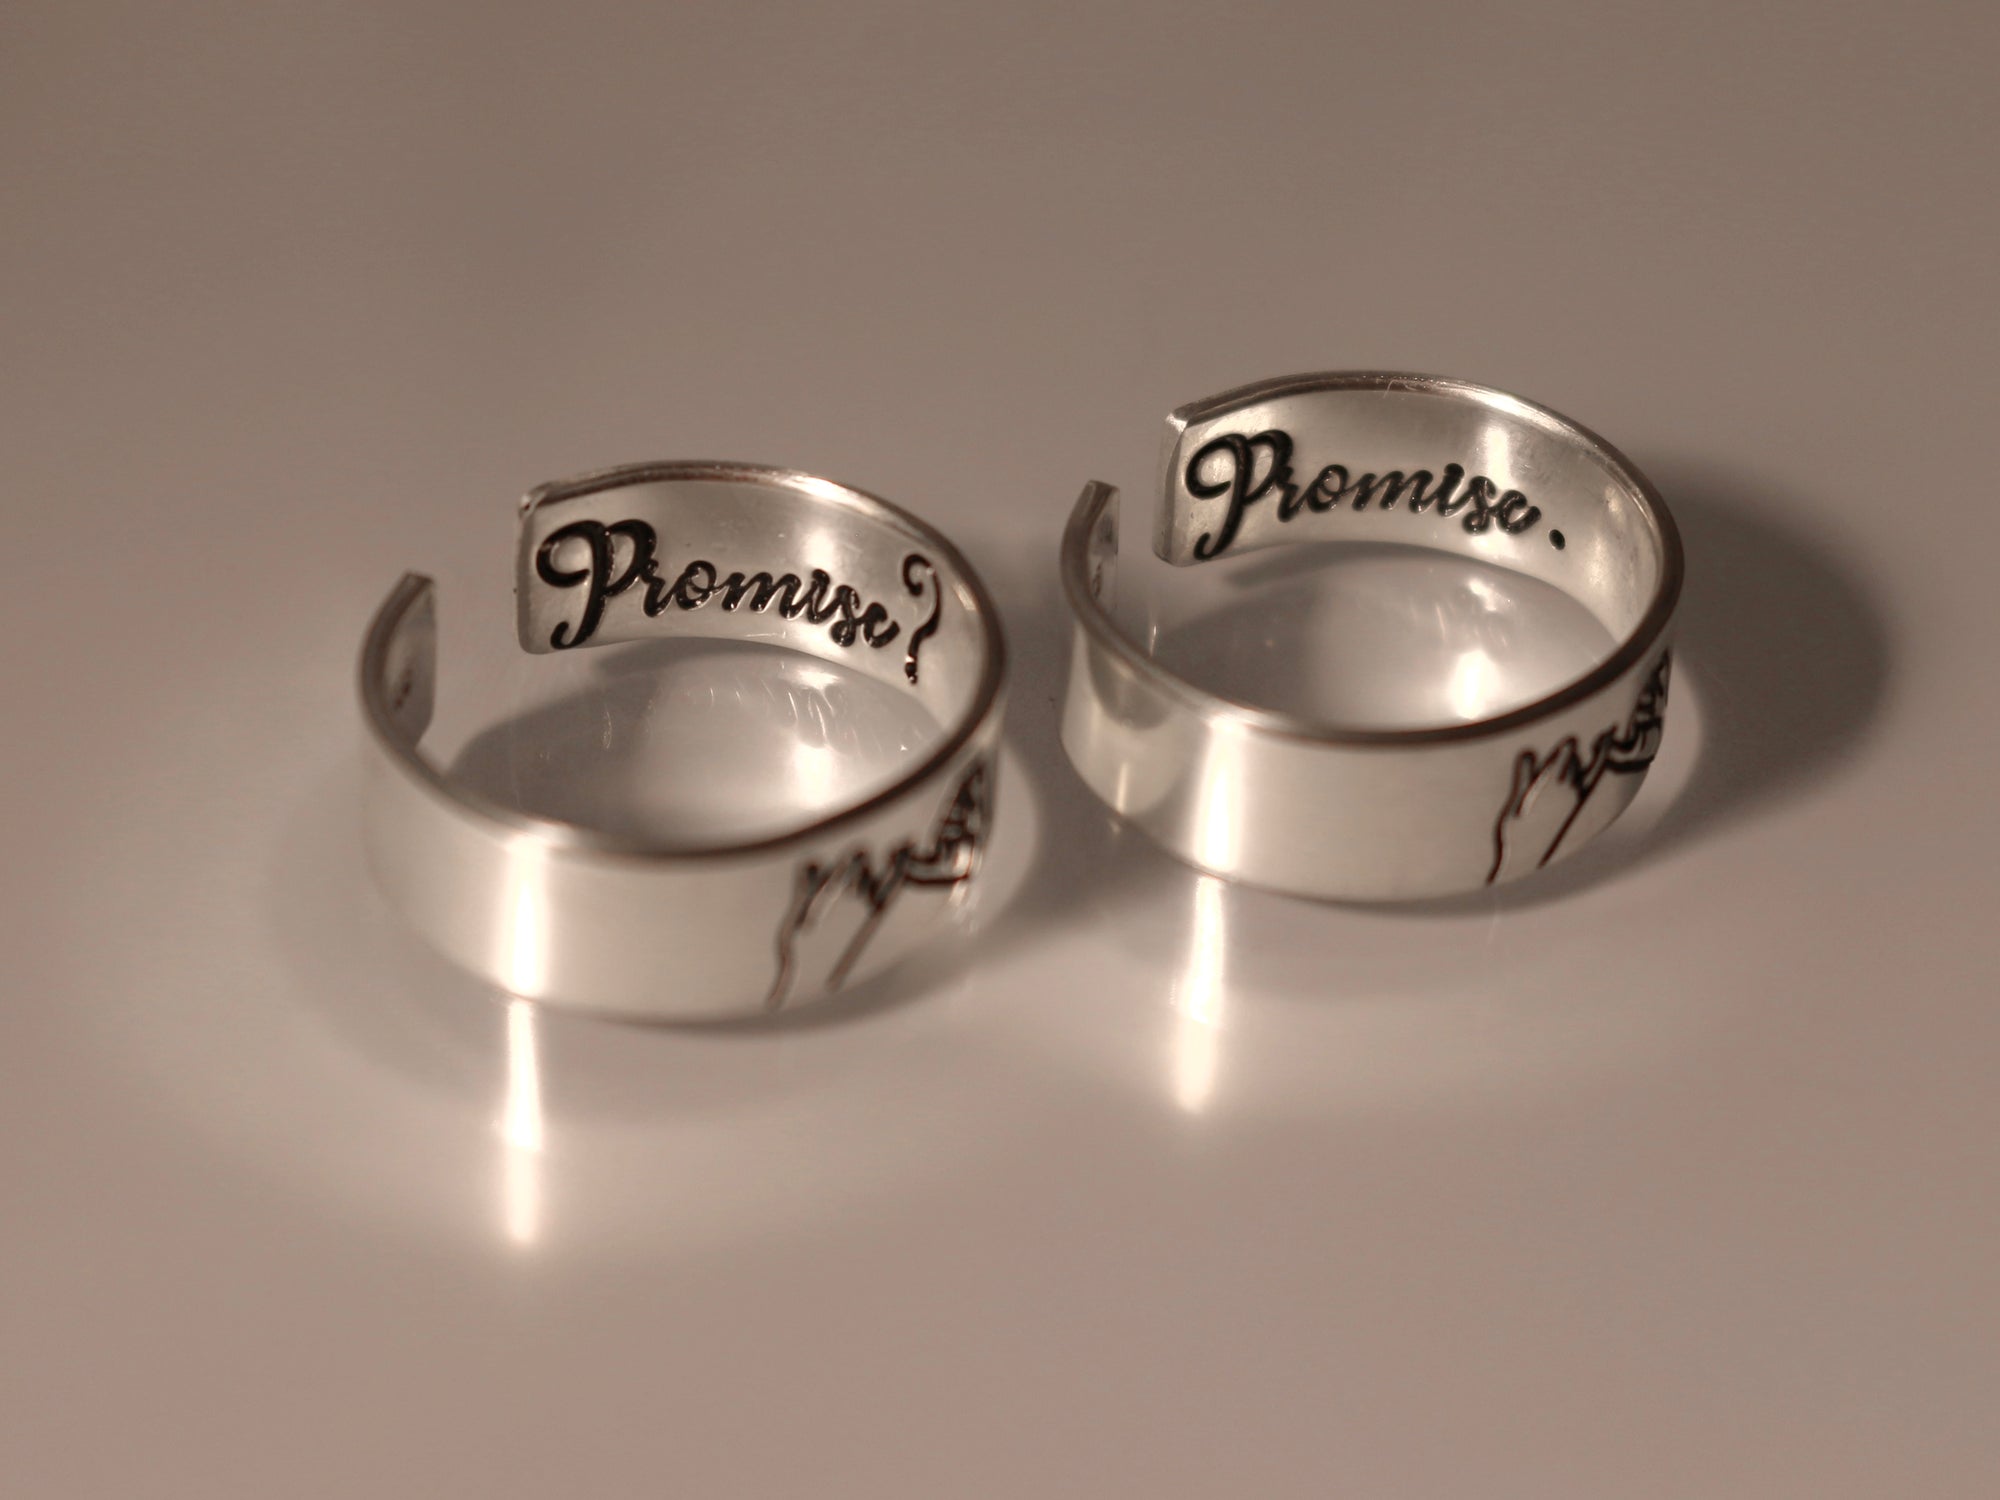 Skeleton Pinky Promise Couple Ring, Friendship Rings, Matching Ring Set, Custom Pinky Swear Initial Ring Set, Best Friend Rings Gift